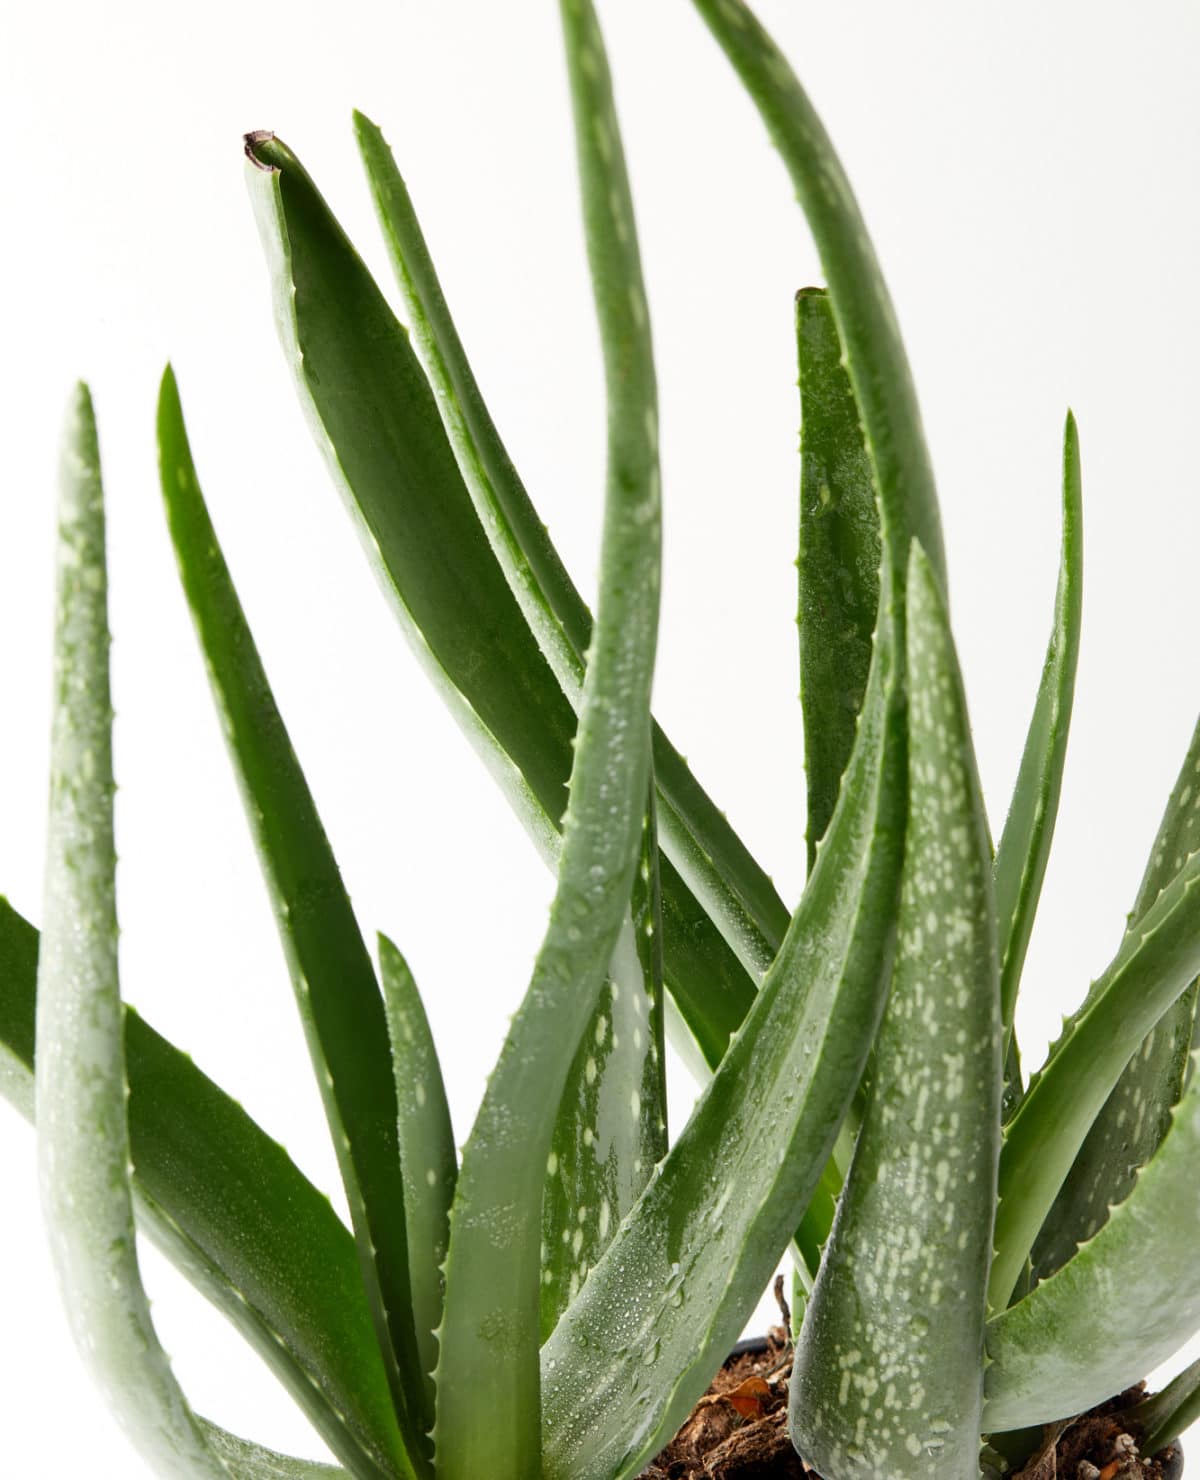 Learn how to care for an aloe vera plant!